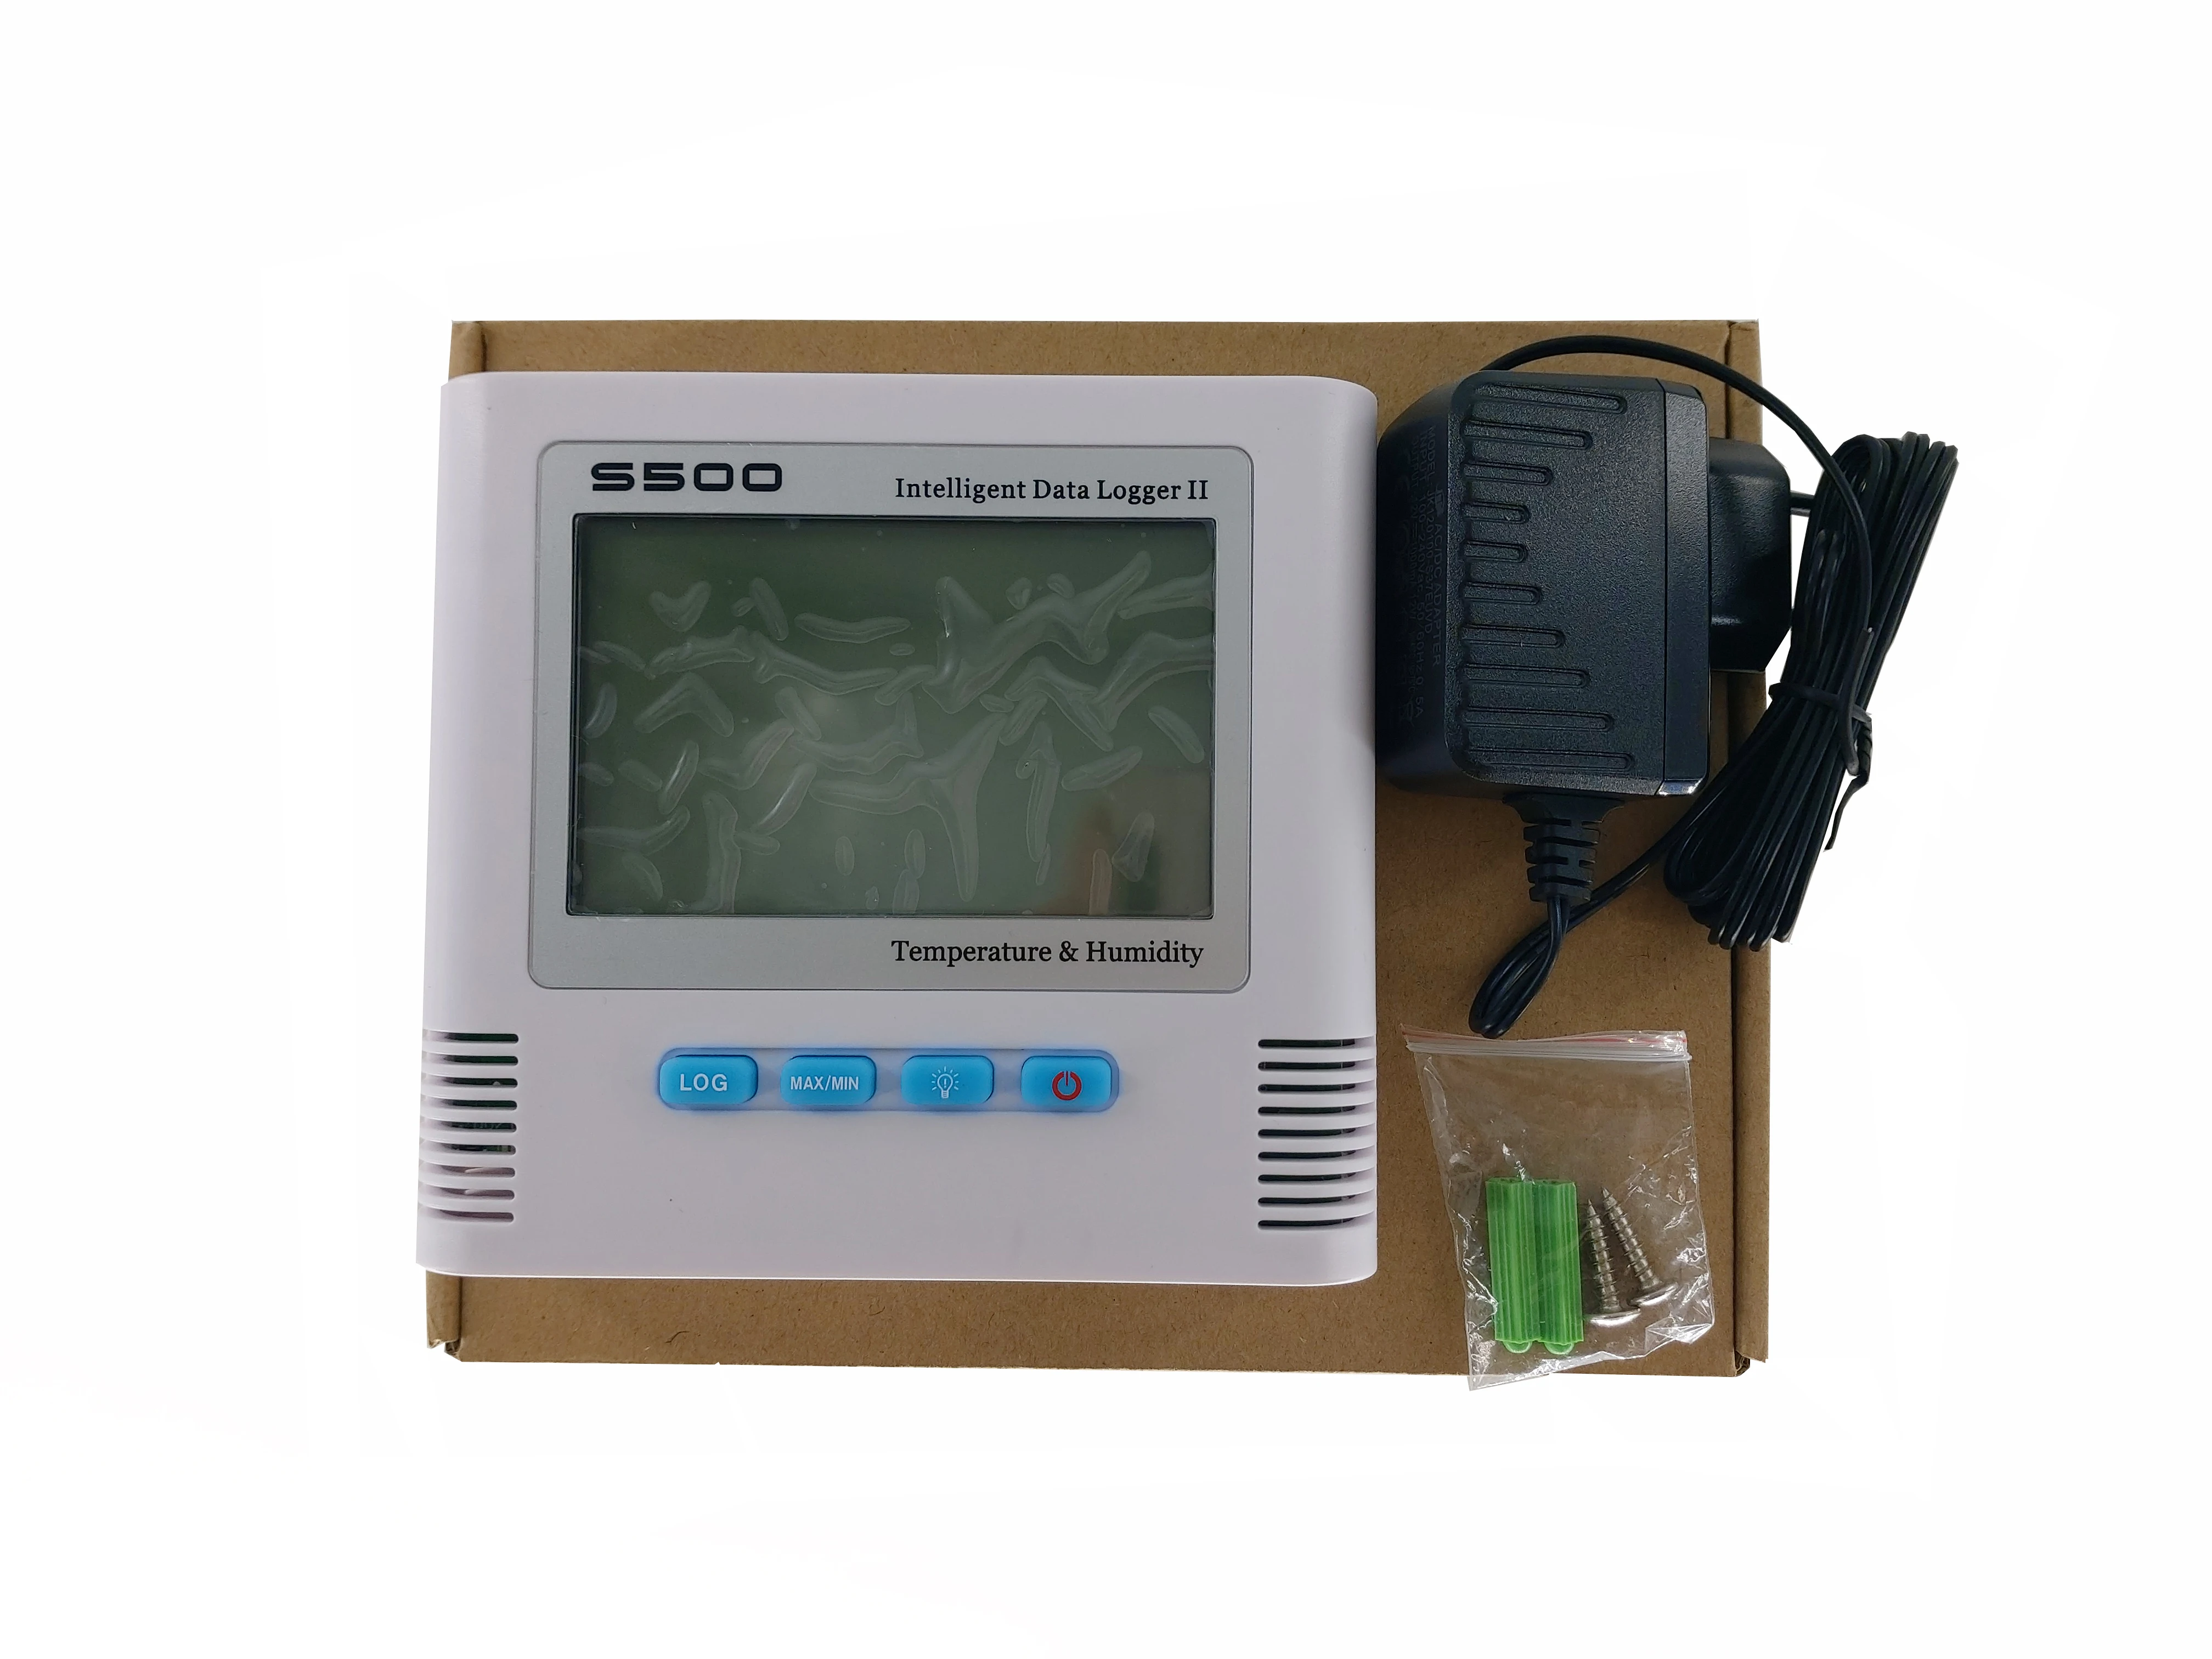 

S500-TH-RJ45 Digital Thermometer Hygrometer Meter Recorder Temperature Humidity Data Logger with Realtime Monitor System